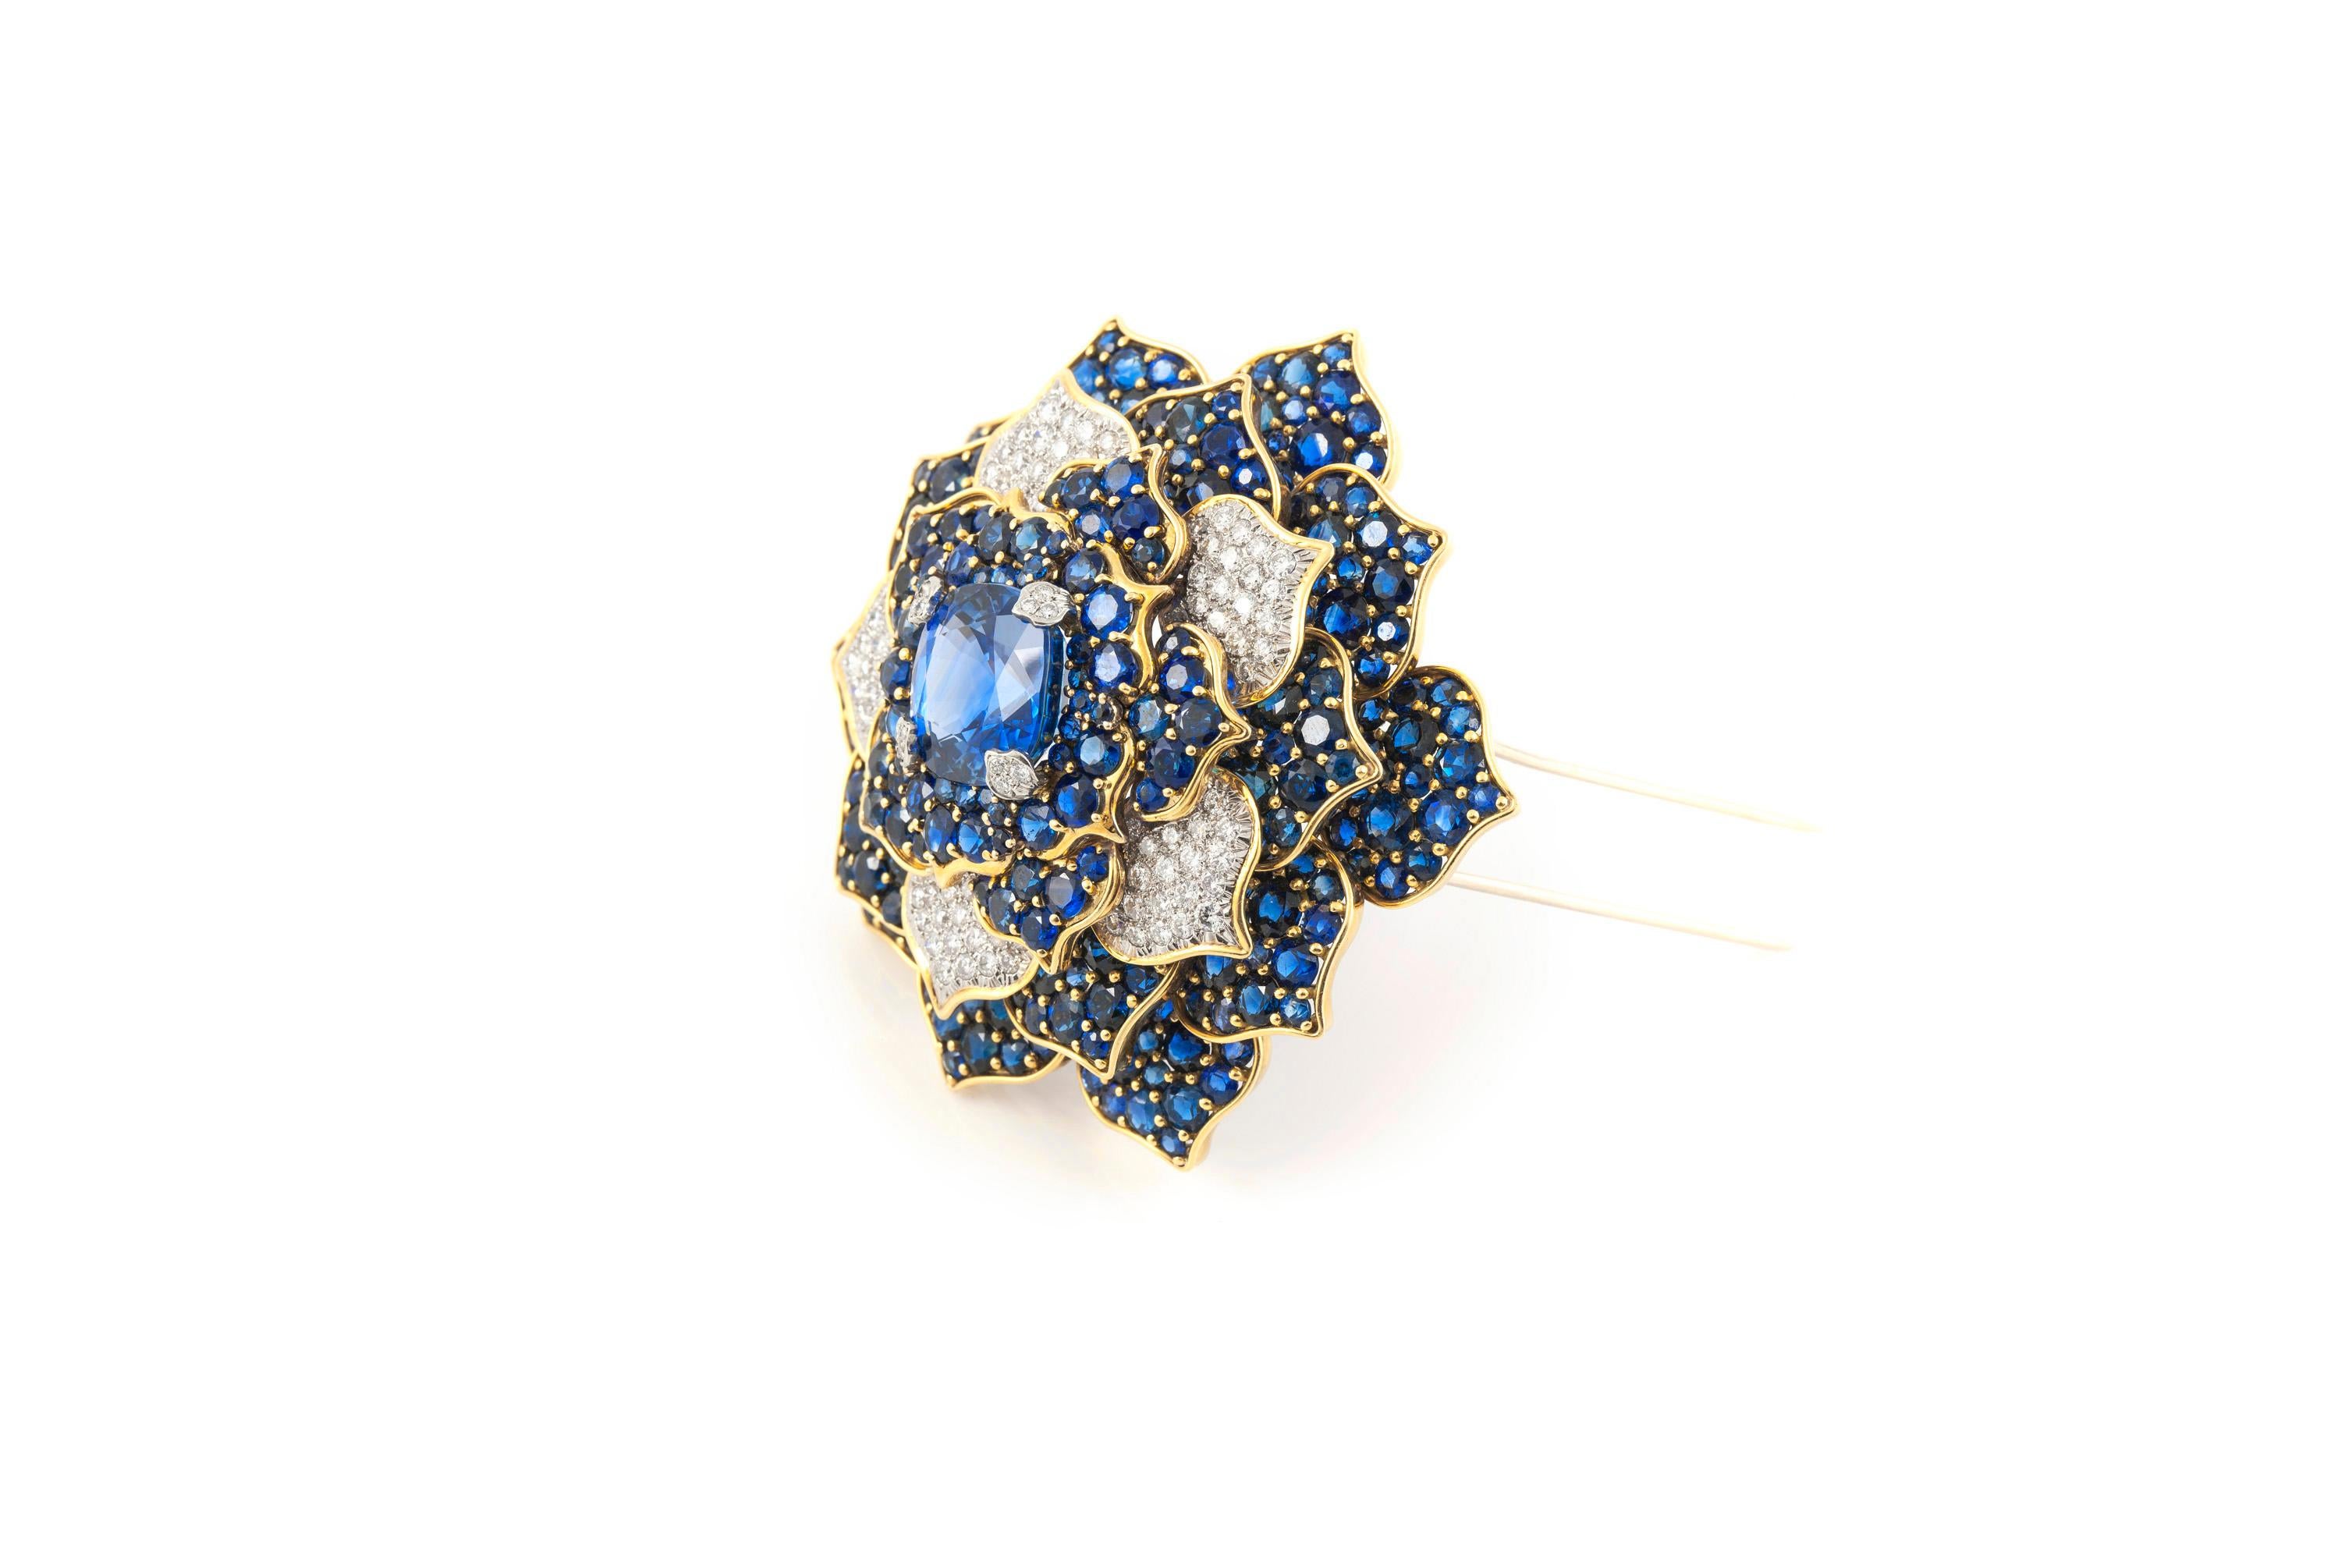 Finely crafted in 18k yellow gold and platinum with an AGL certified center Ceylon origin, non-heat treated Cushion cut Sapphire weighing 20.01 carats.
The brooch features additional Round cut Sapphires weighing approximately a total of 55.00 carats